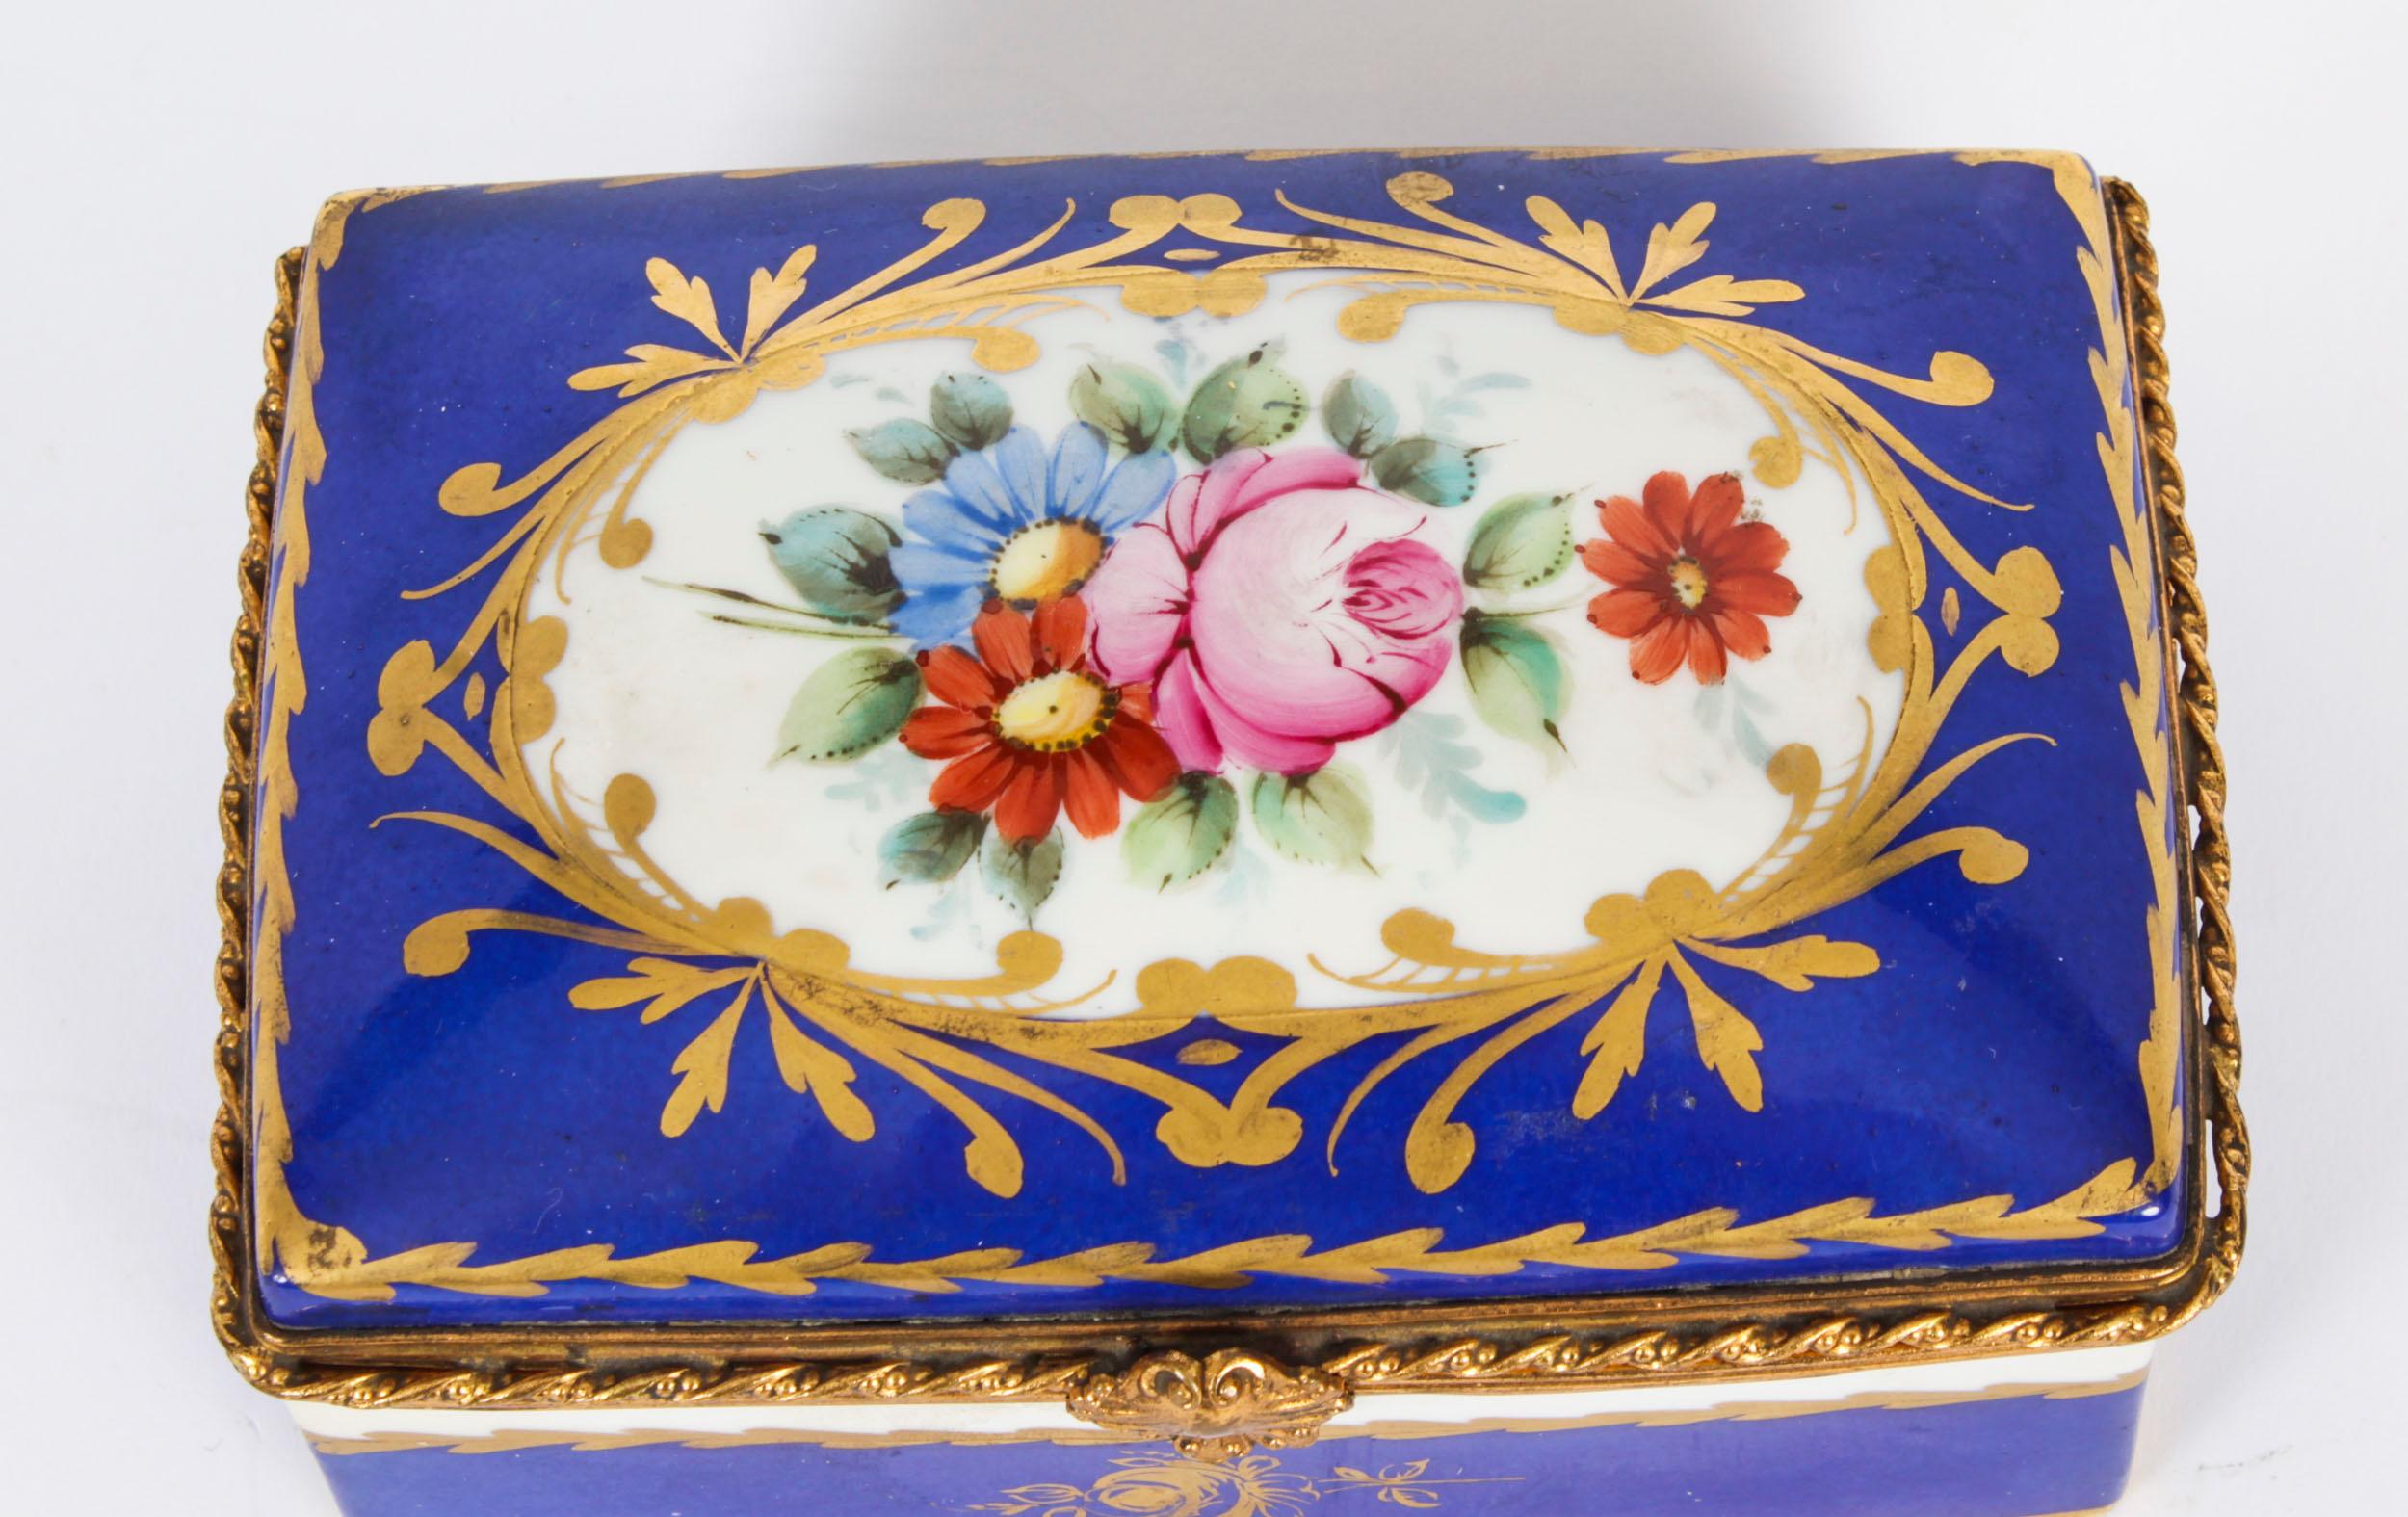 Antique Limoges Royal Blue Ormolu Mounted Casket Box 19h Century In Good Condition For Sale In London, GB